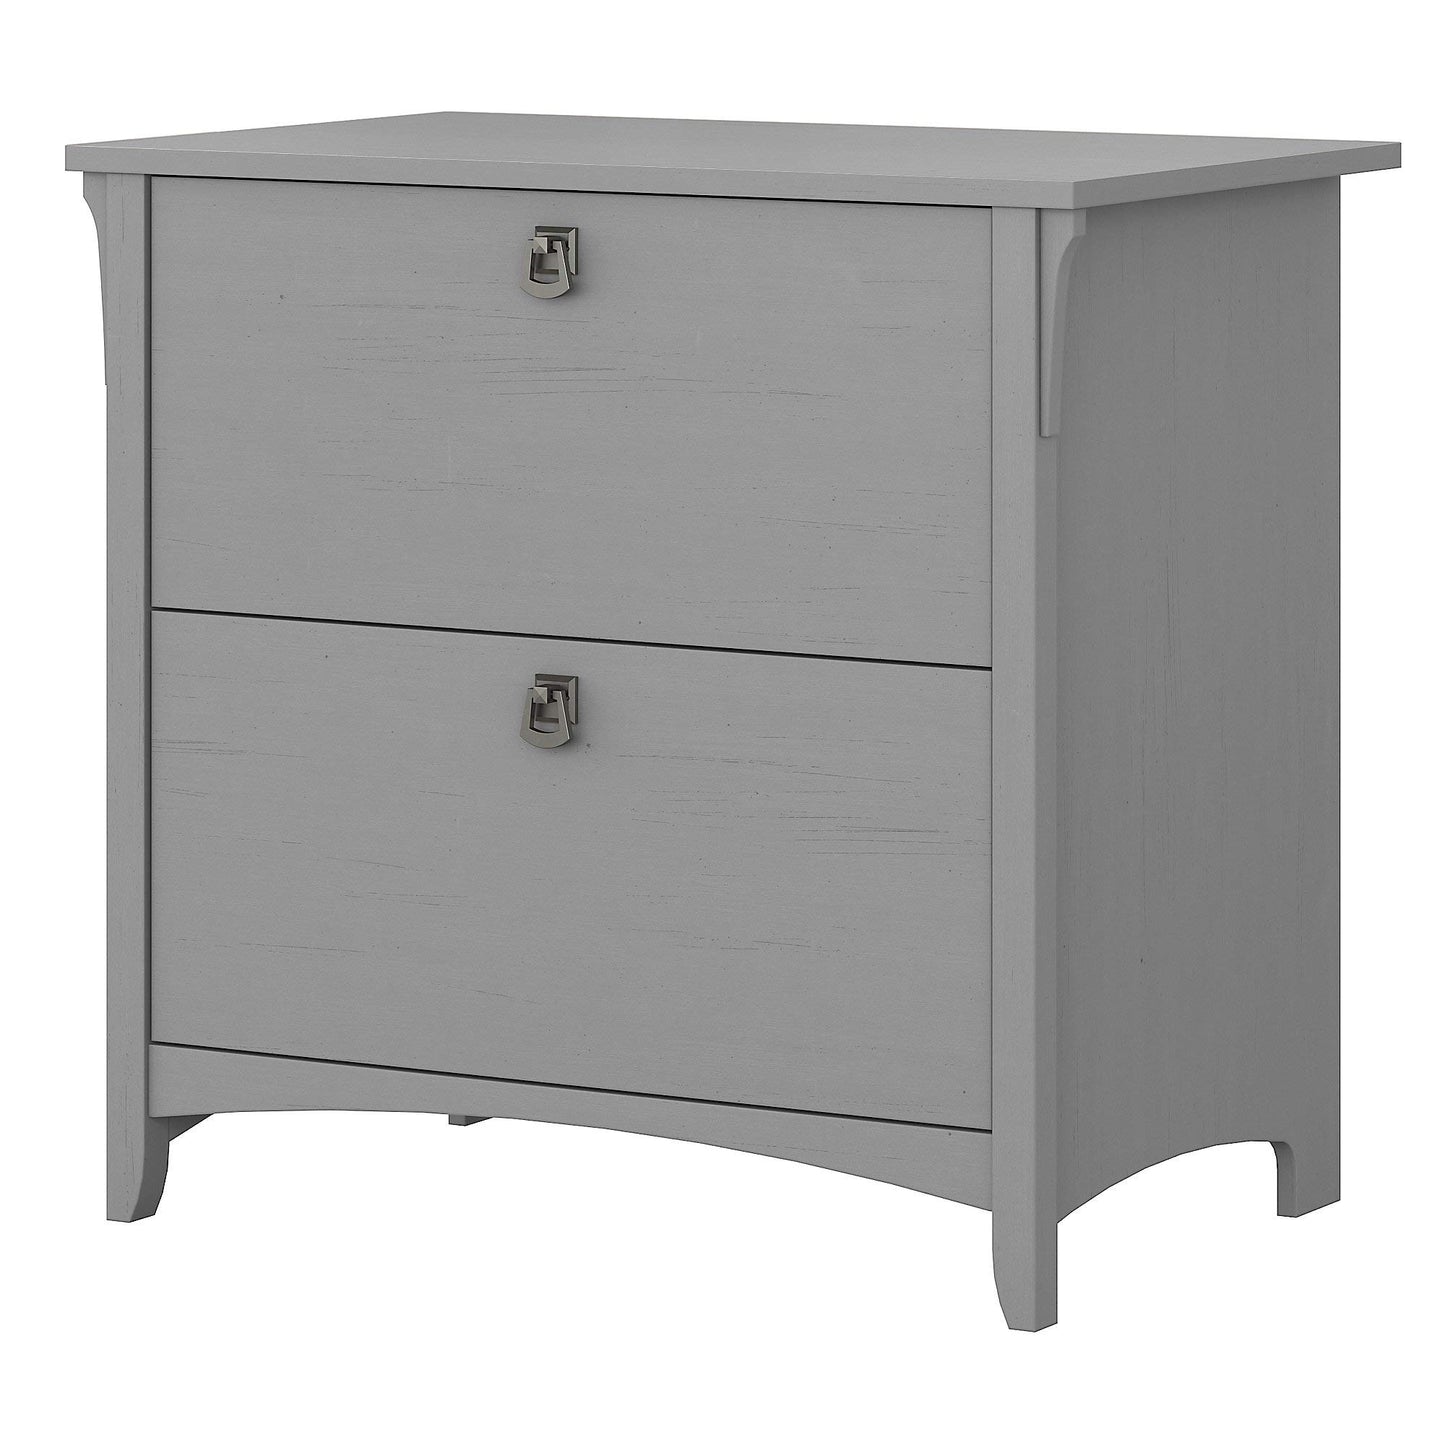 Bush Furniture Salinas 2 Drawer Lateral File Cabinet | Home Office Storage for Letter, Legal, and A4-Size Documents, Cape Cod Gray